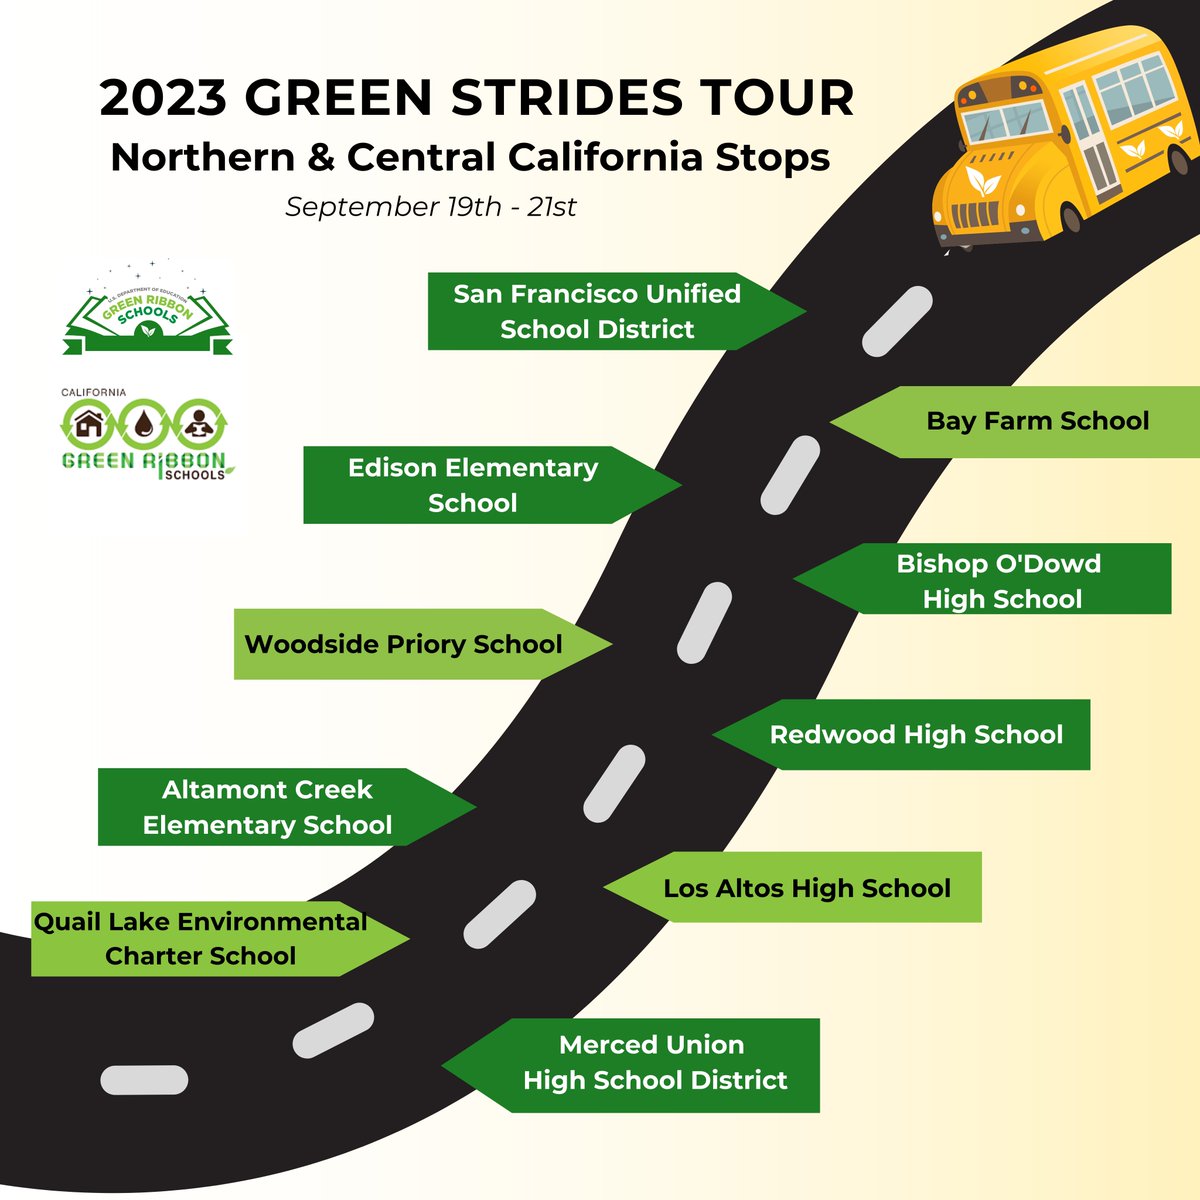 Lots to see on the #GreenStridesTour in @SFUnified, including infrastructure upgrades to improve health and efficiency, green schoolyards, and waste-diversion programs. @usedgov @CAGreenRibbon @CADeptEd